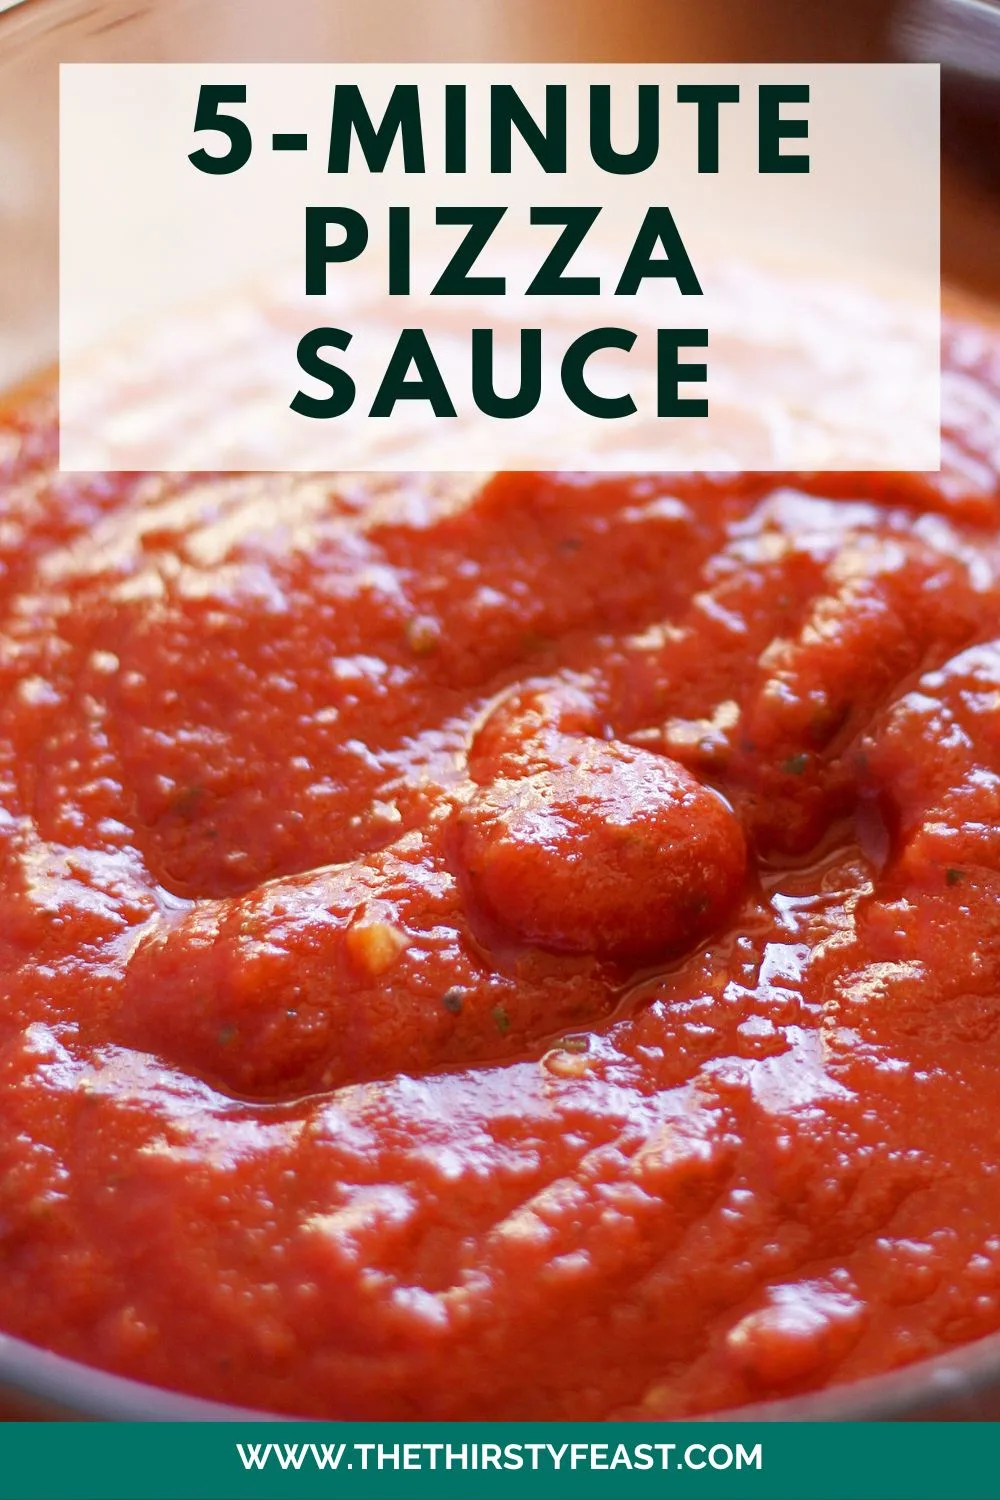 closeup of homemade pizza sauce for pinterest, captioned with "5-minute pizza sauce"